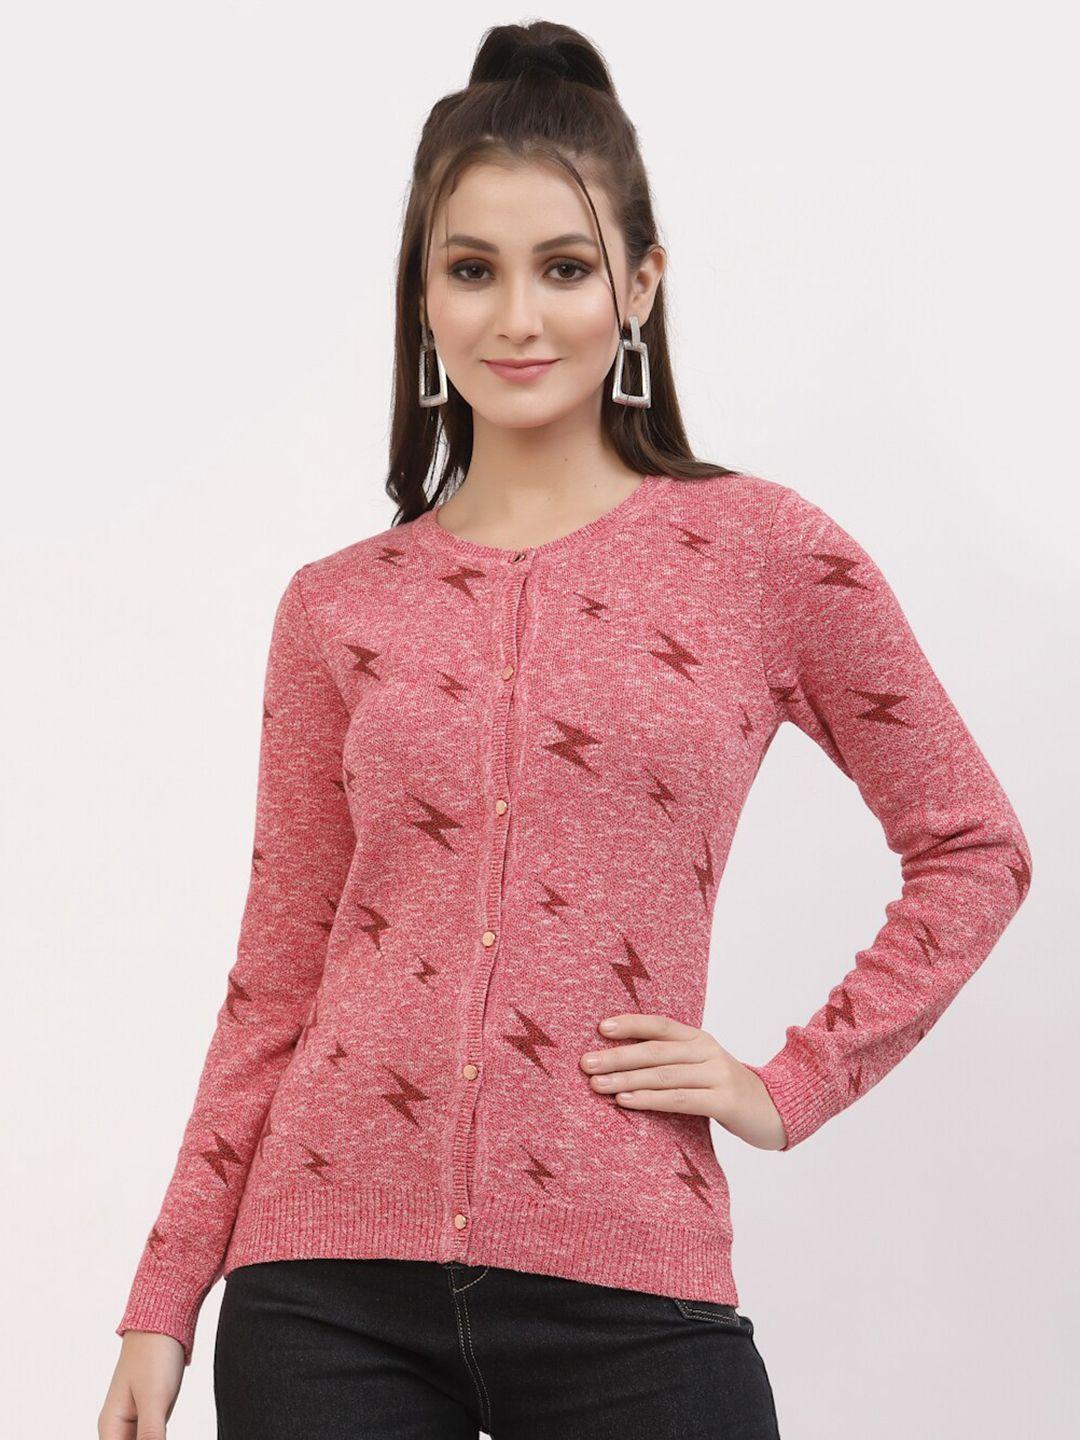 juelle women red printed cardigan